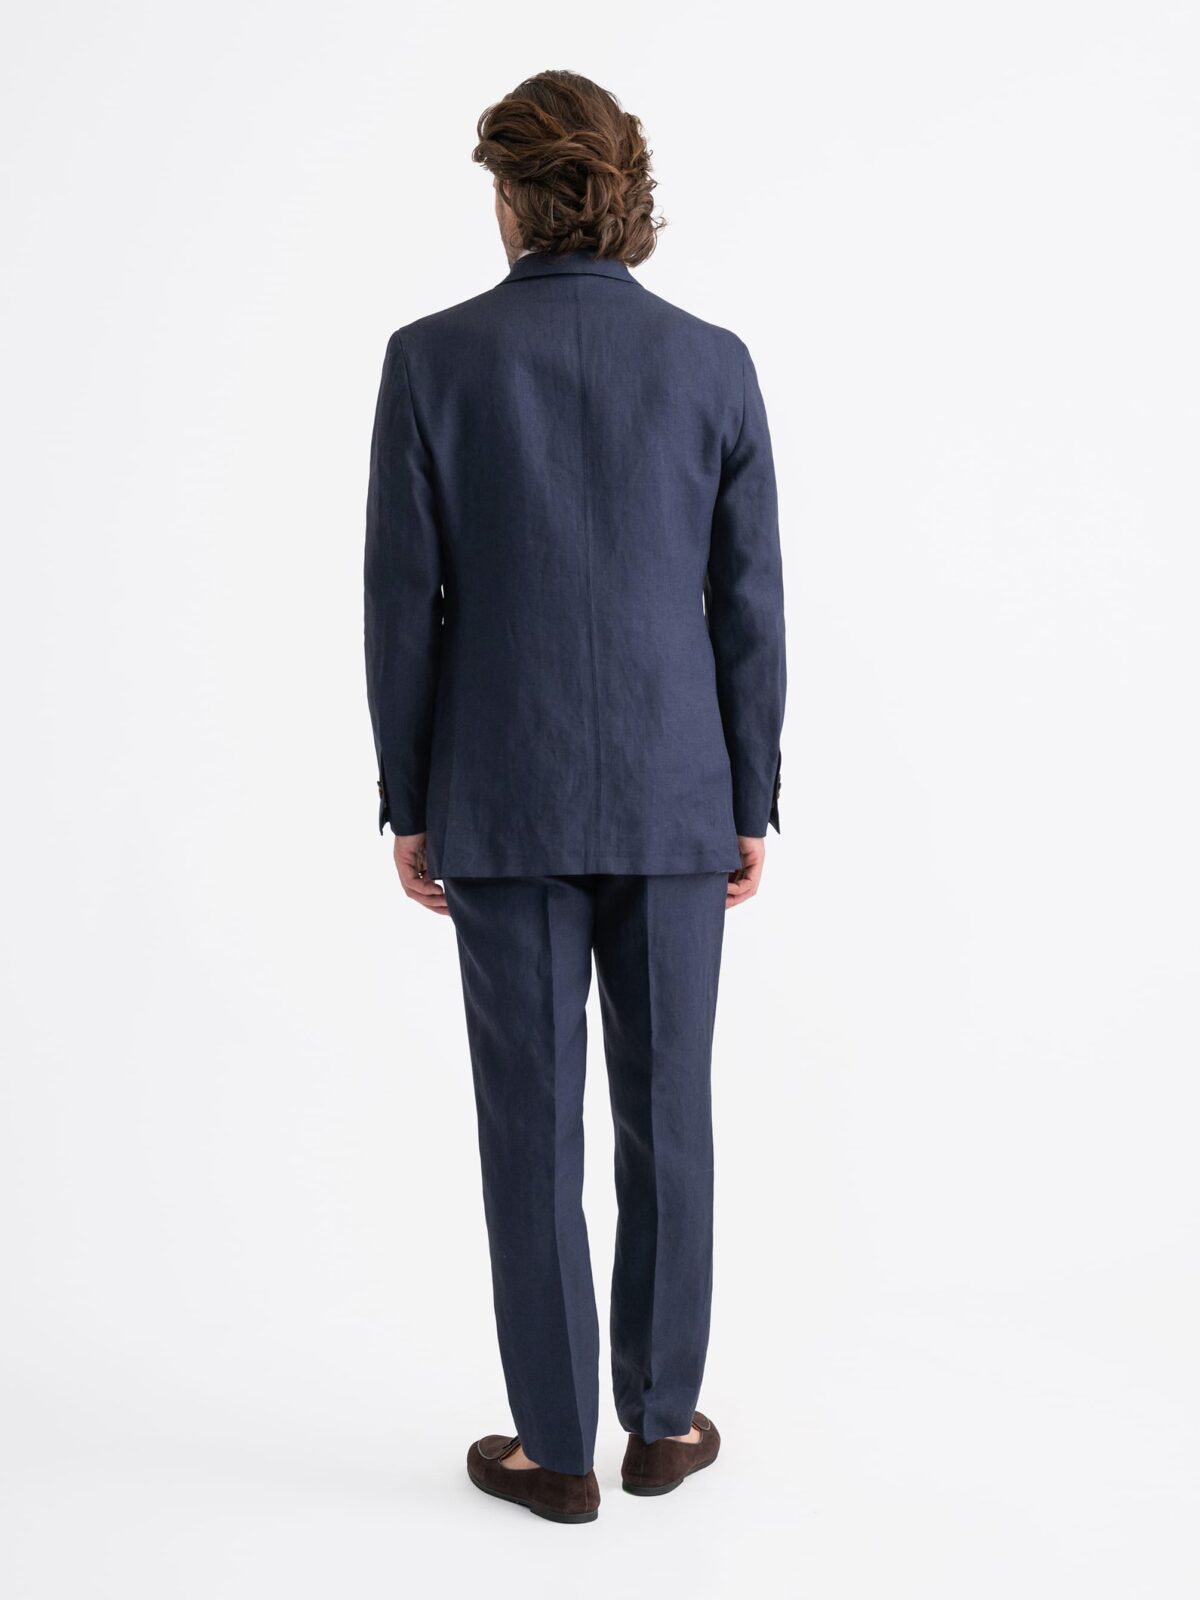 Navy Irish Linen Double Breasted Bedford Suit - Custom Fit Tailored Clothing